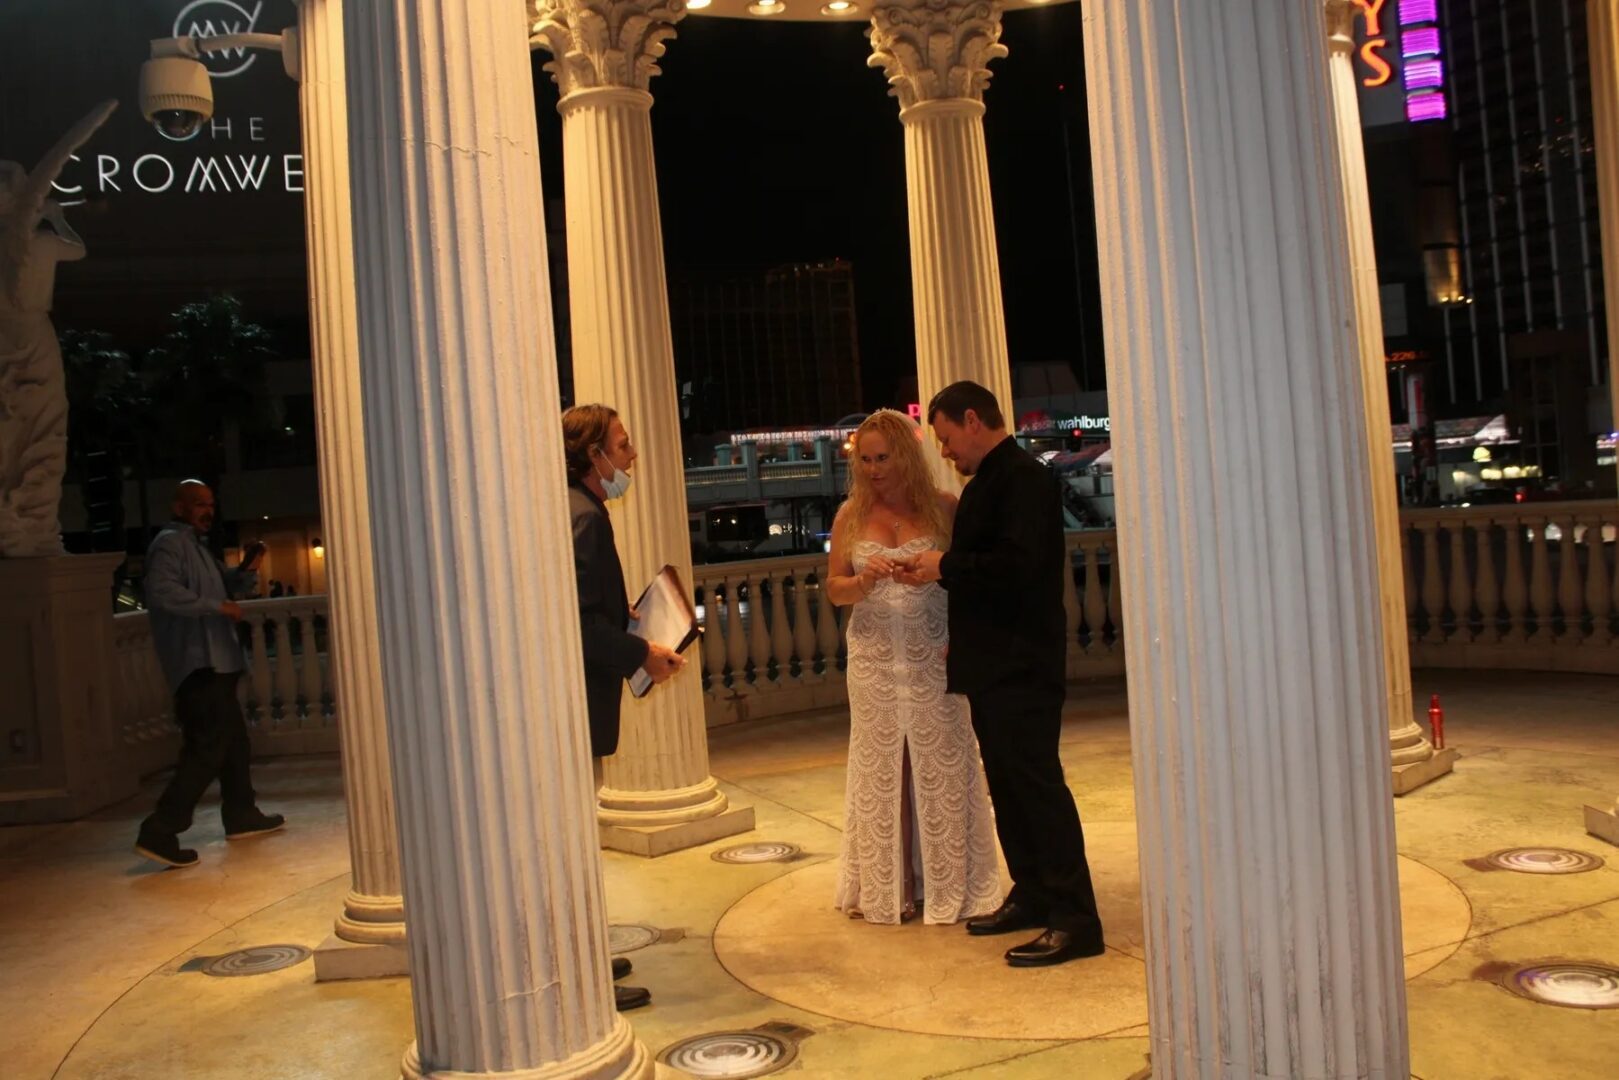 A couple is standing in front of pillars